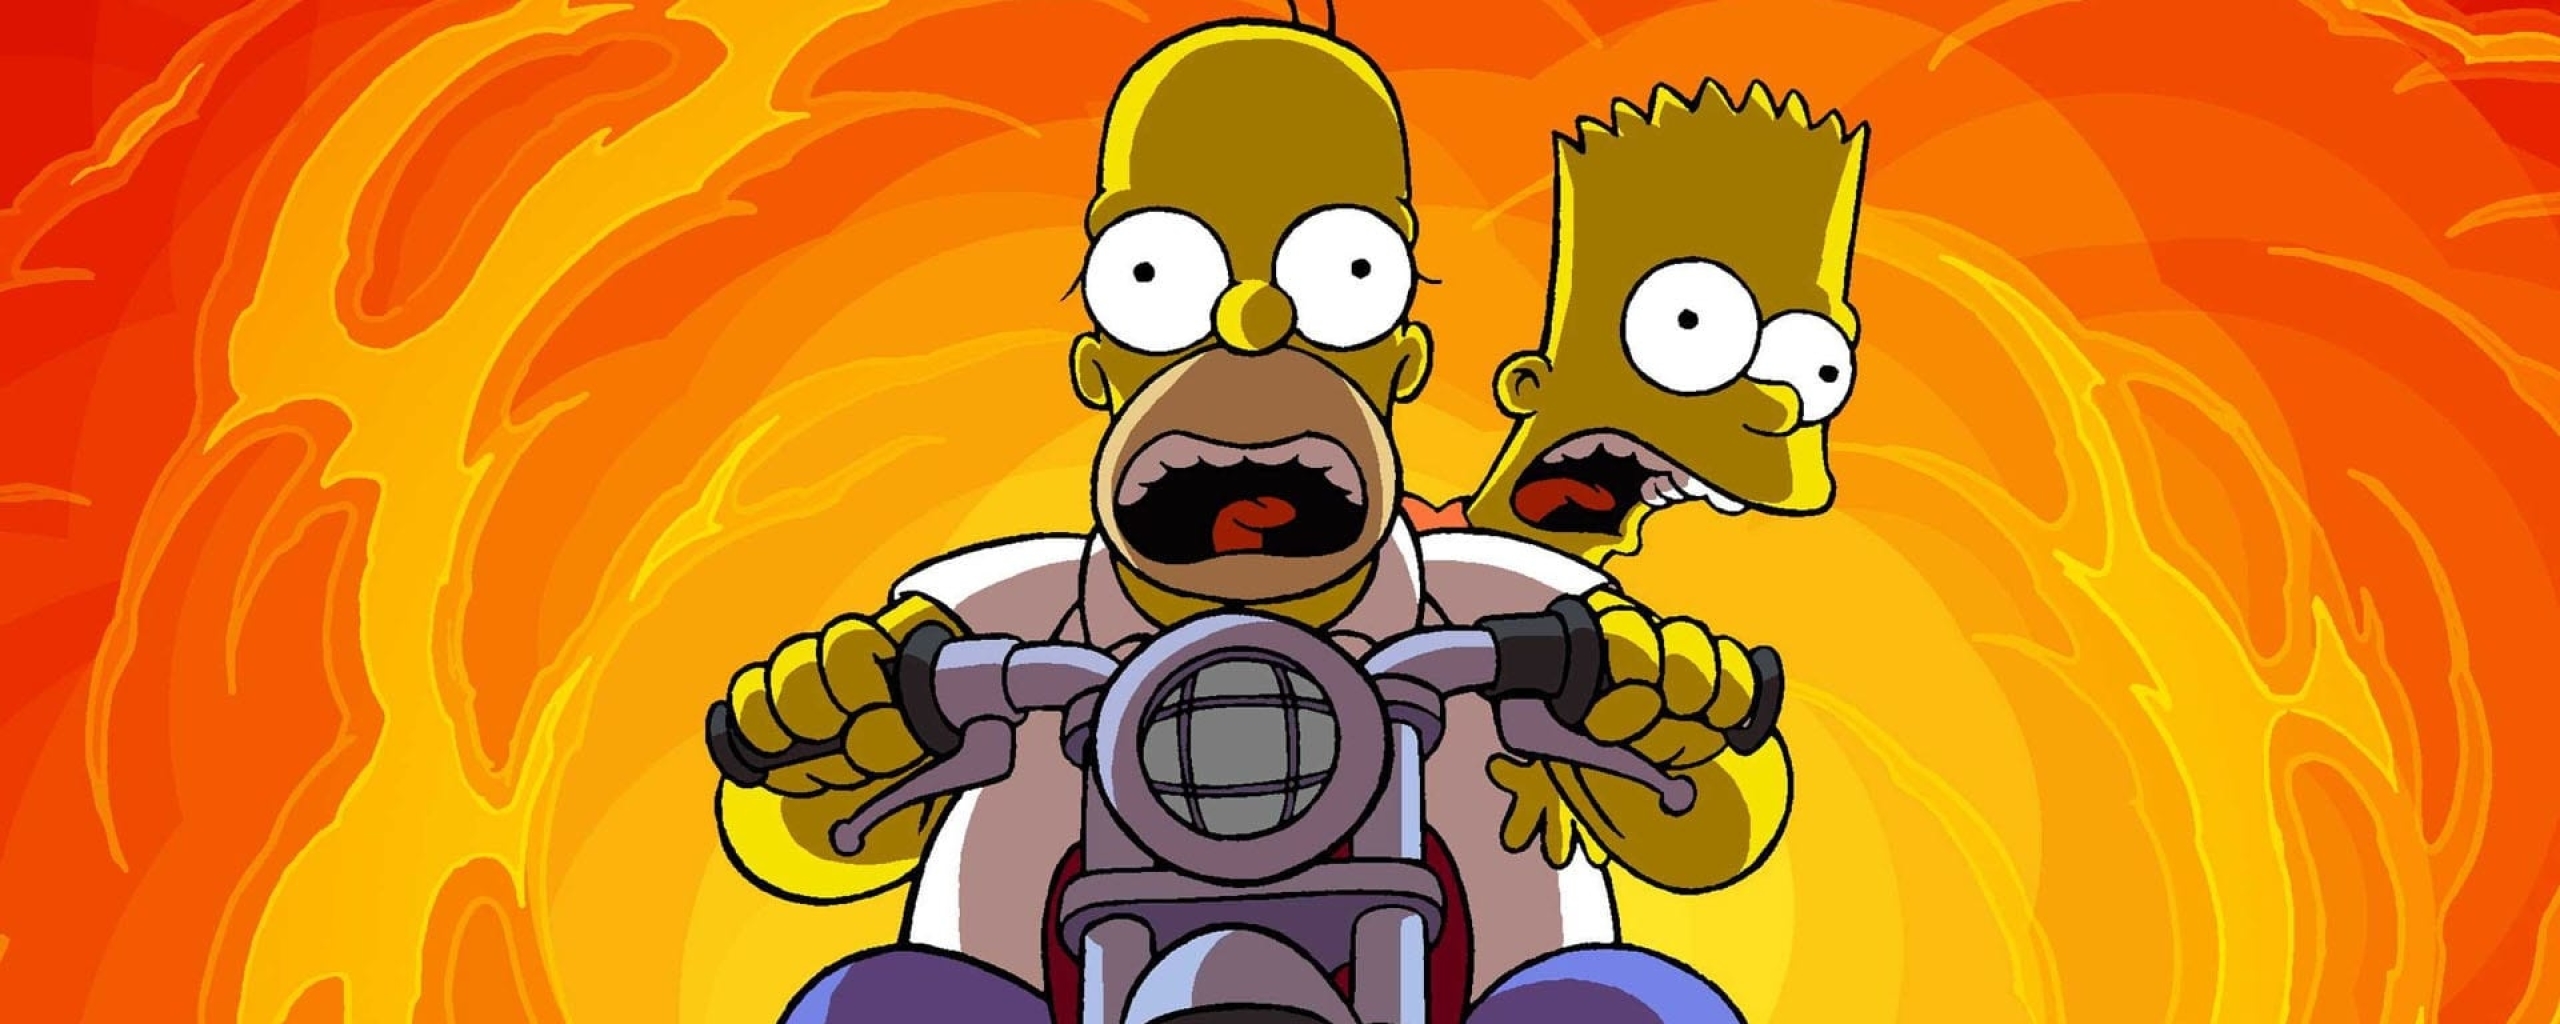 Homer and Bart Simpson ride a motorcycle through a fiery background - The Simpsons